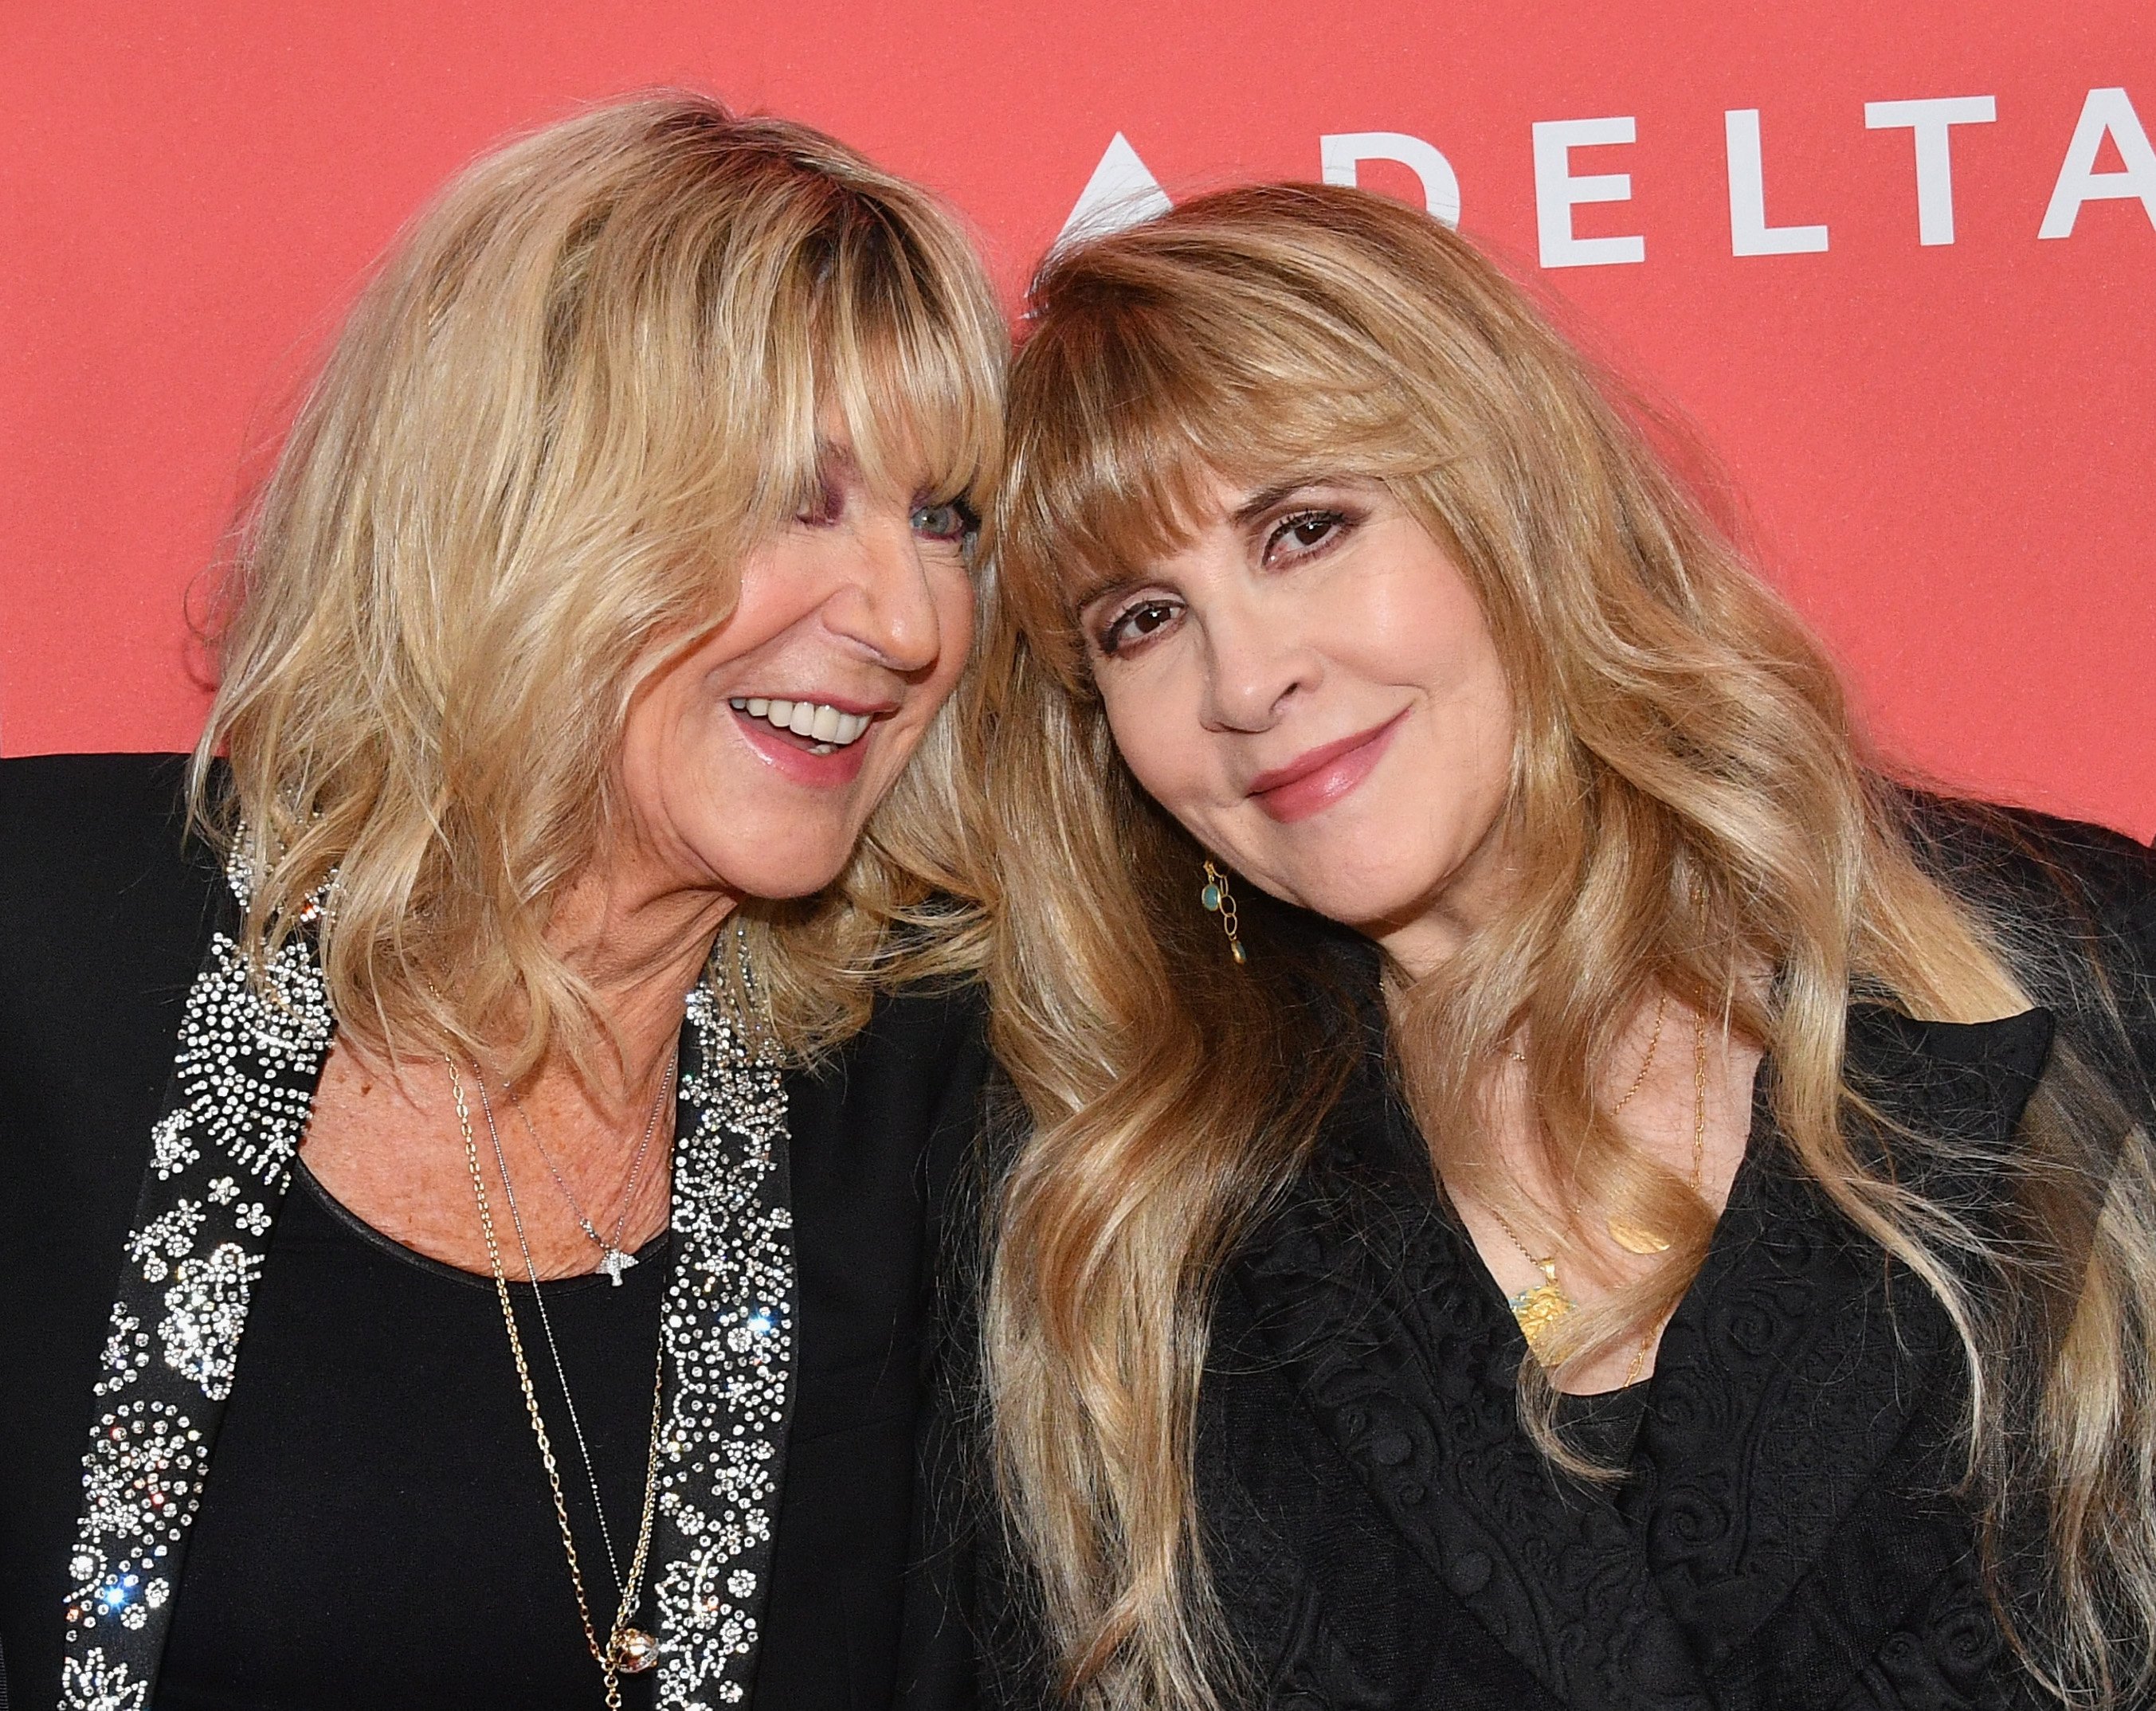 Christine McVie (L) and Stevie Nicks of music group Fleetwood Mac attend MusiCares Person of the Year honoring Fleetwood Mac at Radio City Music Hall on January 26, 2018 in New York City | Source: Getty Images 